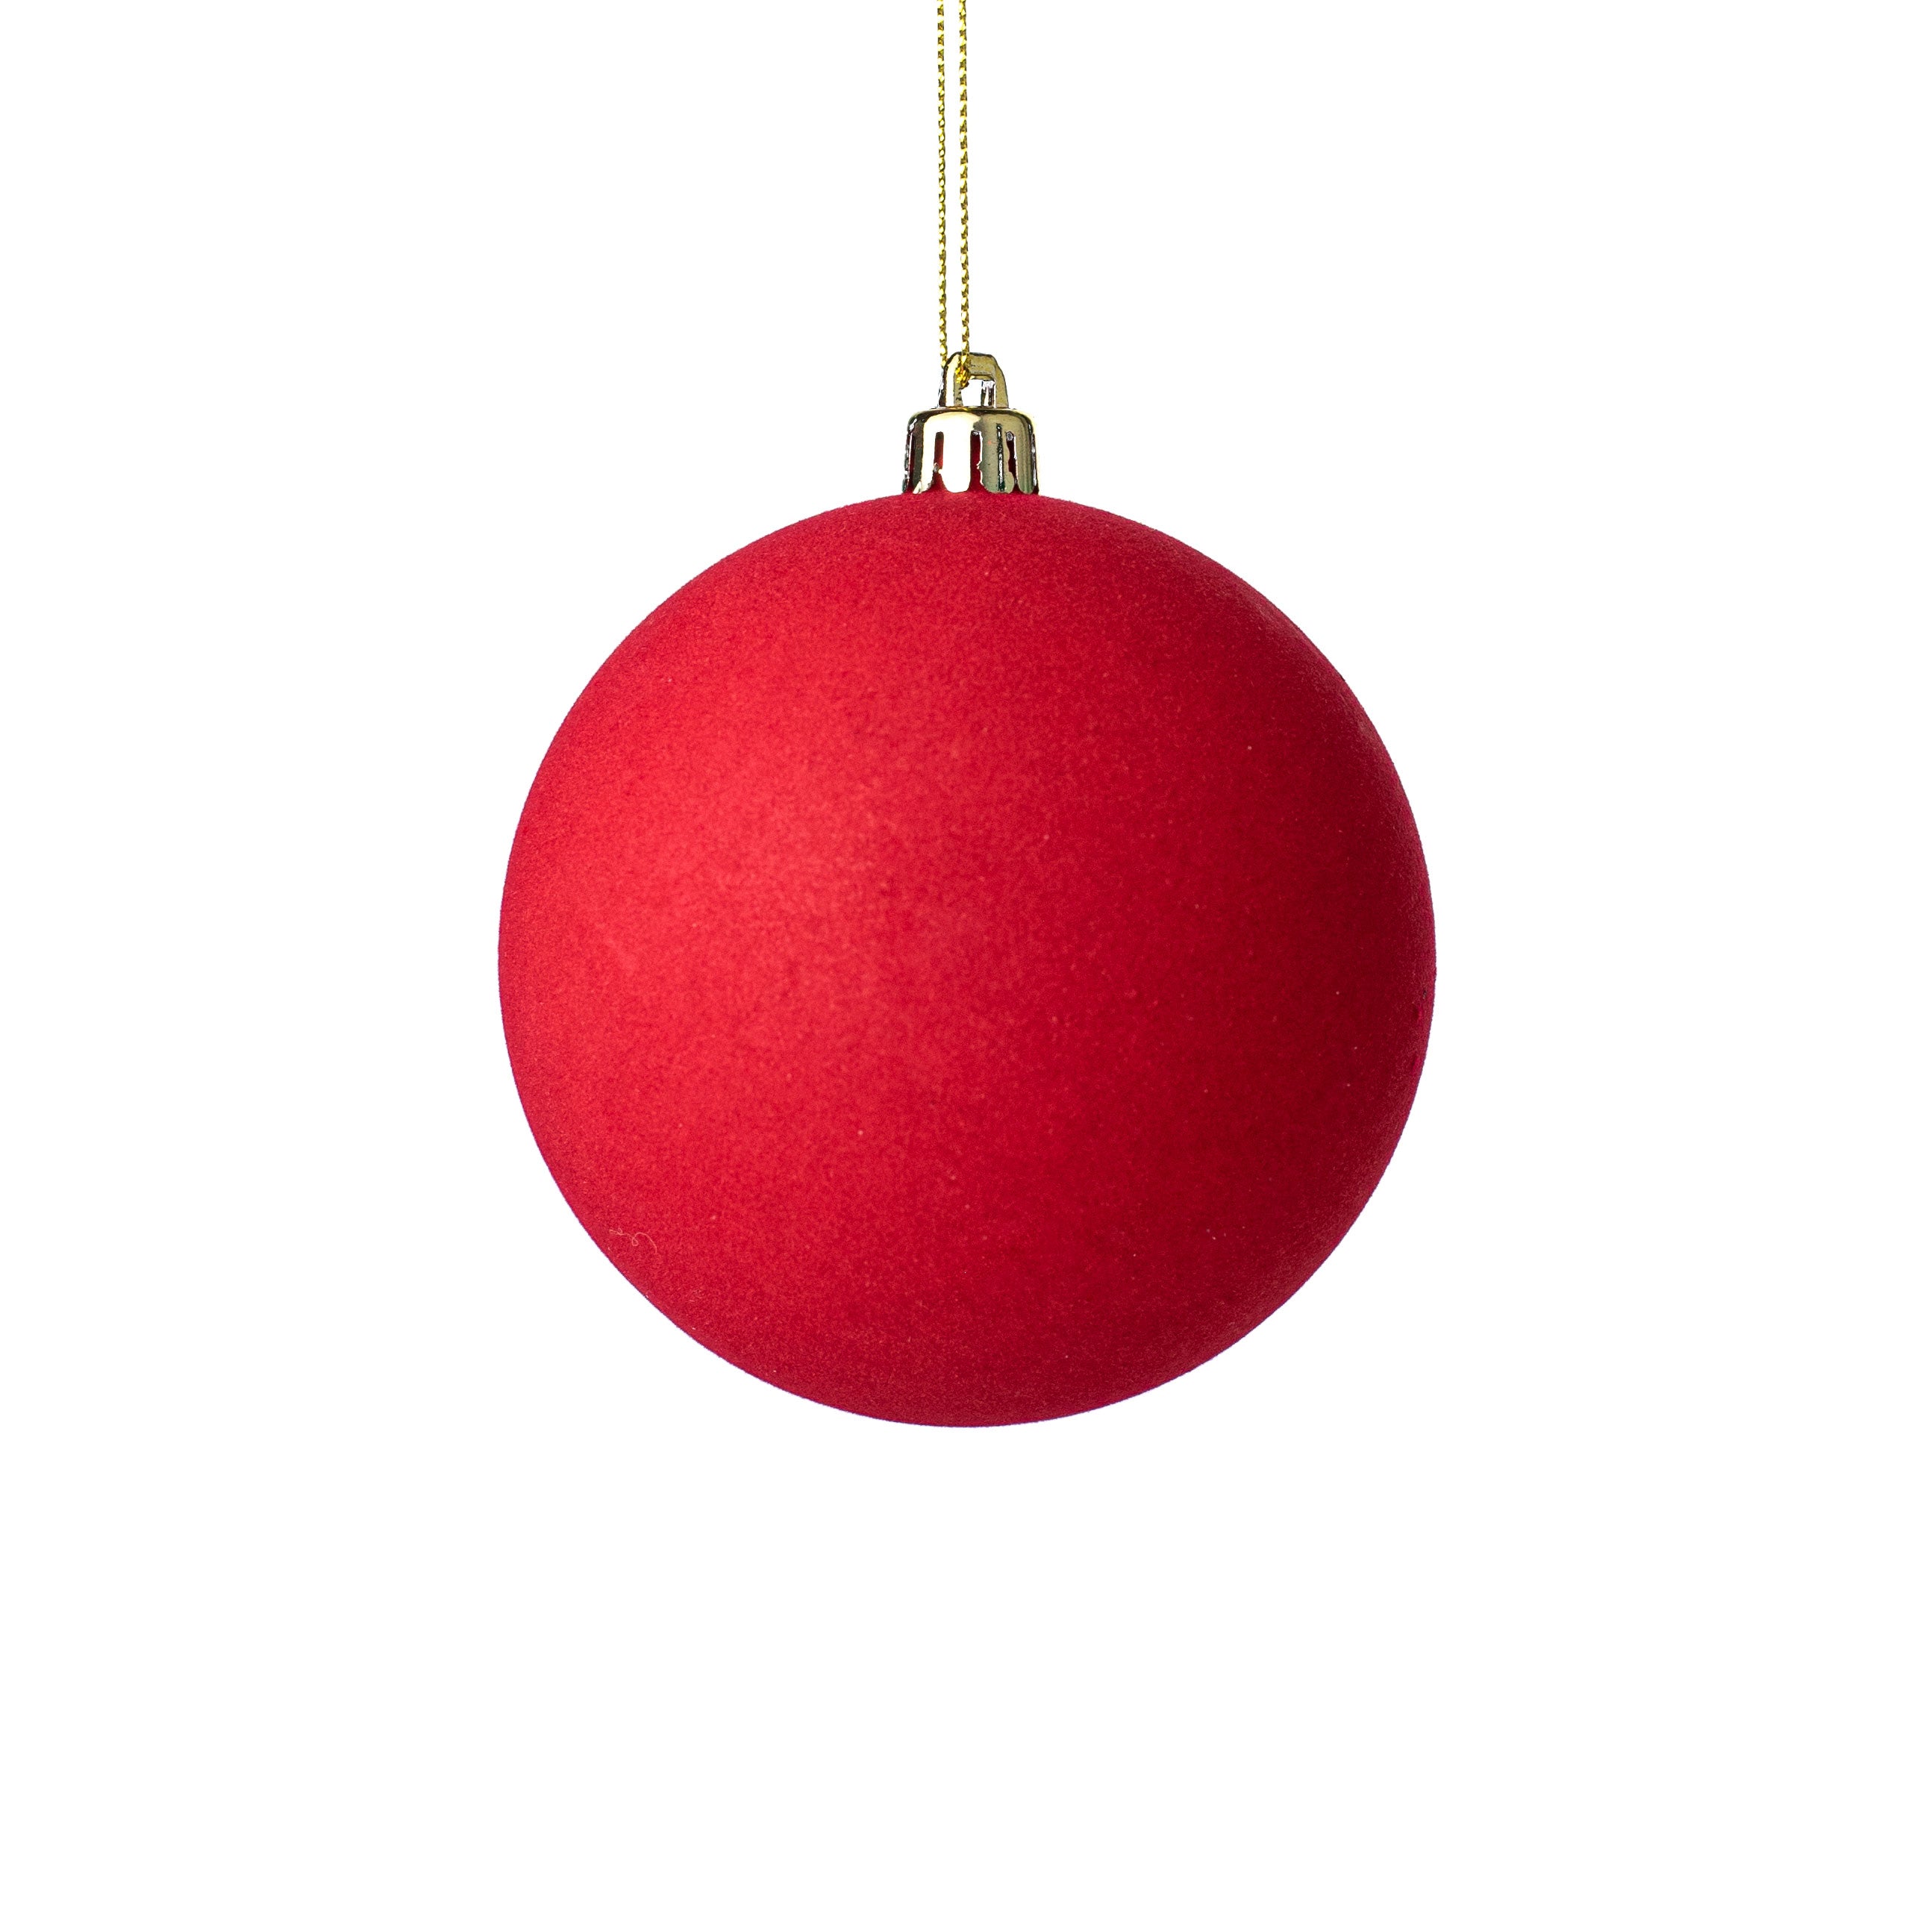 100MM Smooth Flocked Ball Ornament: Red